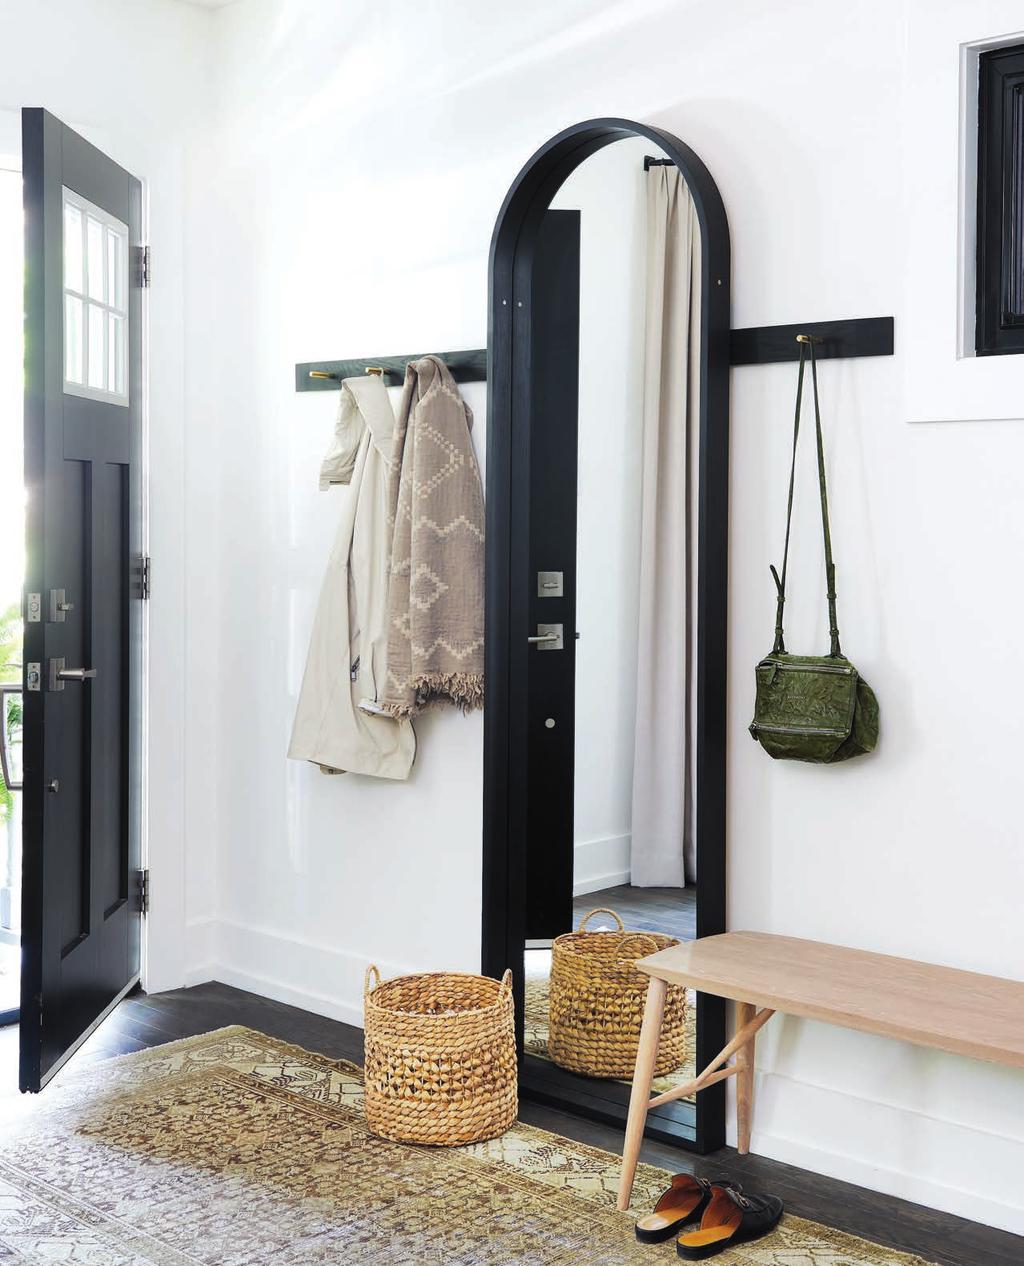 + + + + + + + + + + + + + + + + The entryway boasts a simple and striking mix of functional furnishings.